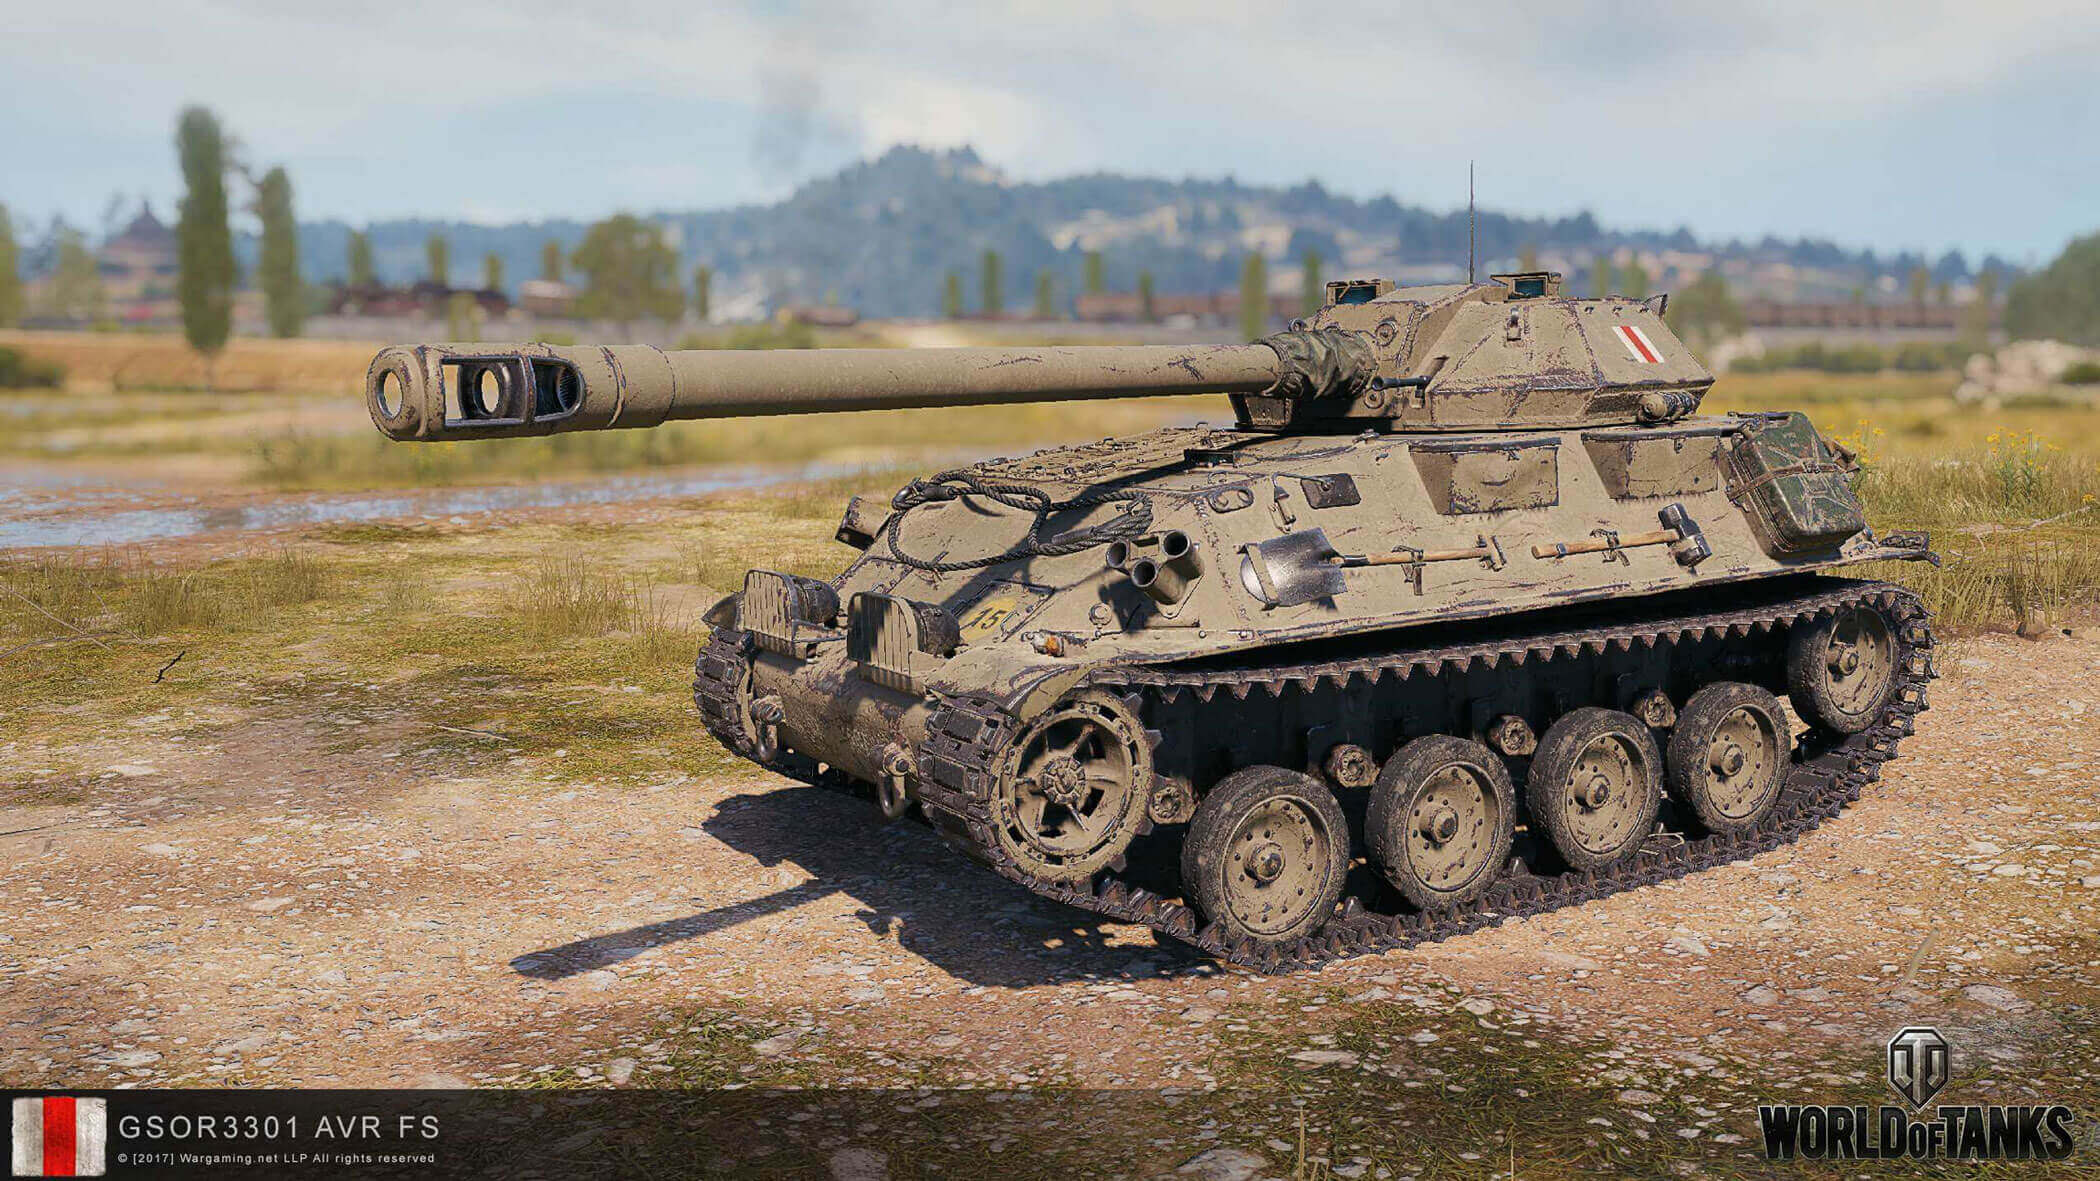 why does world of tanks not have modern tanks